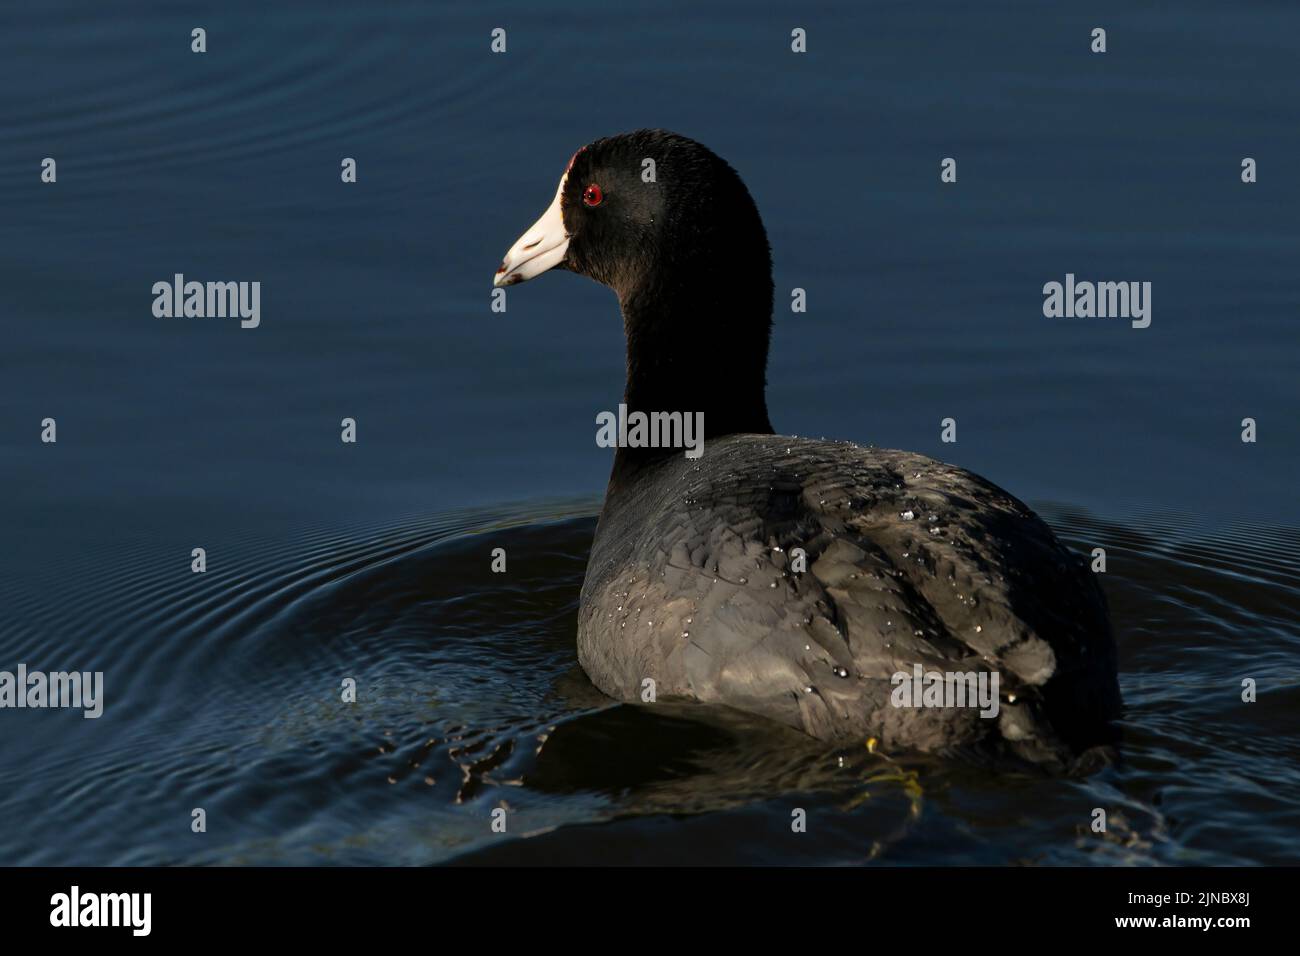 American Coot Stock Photo